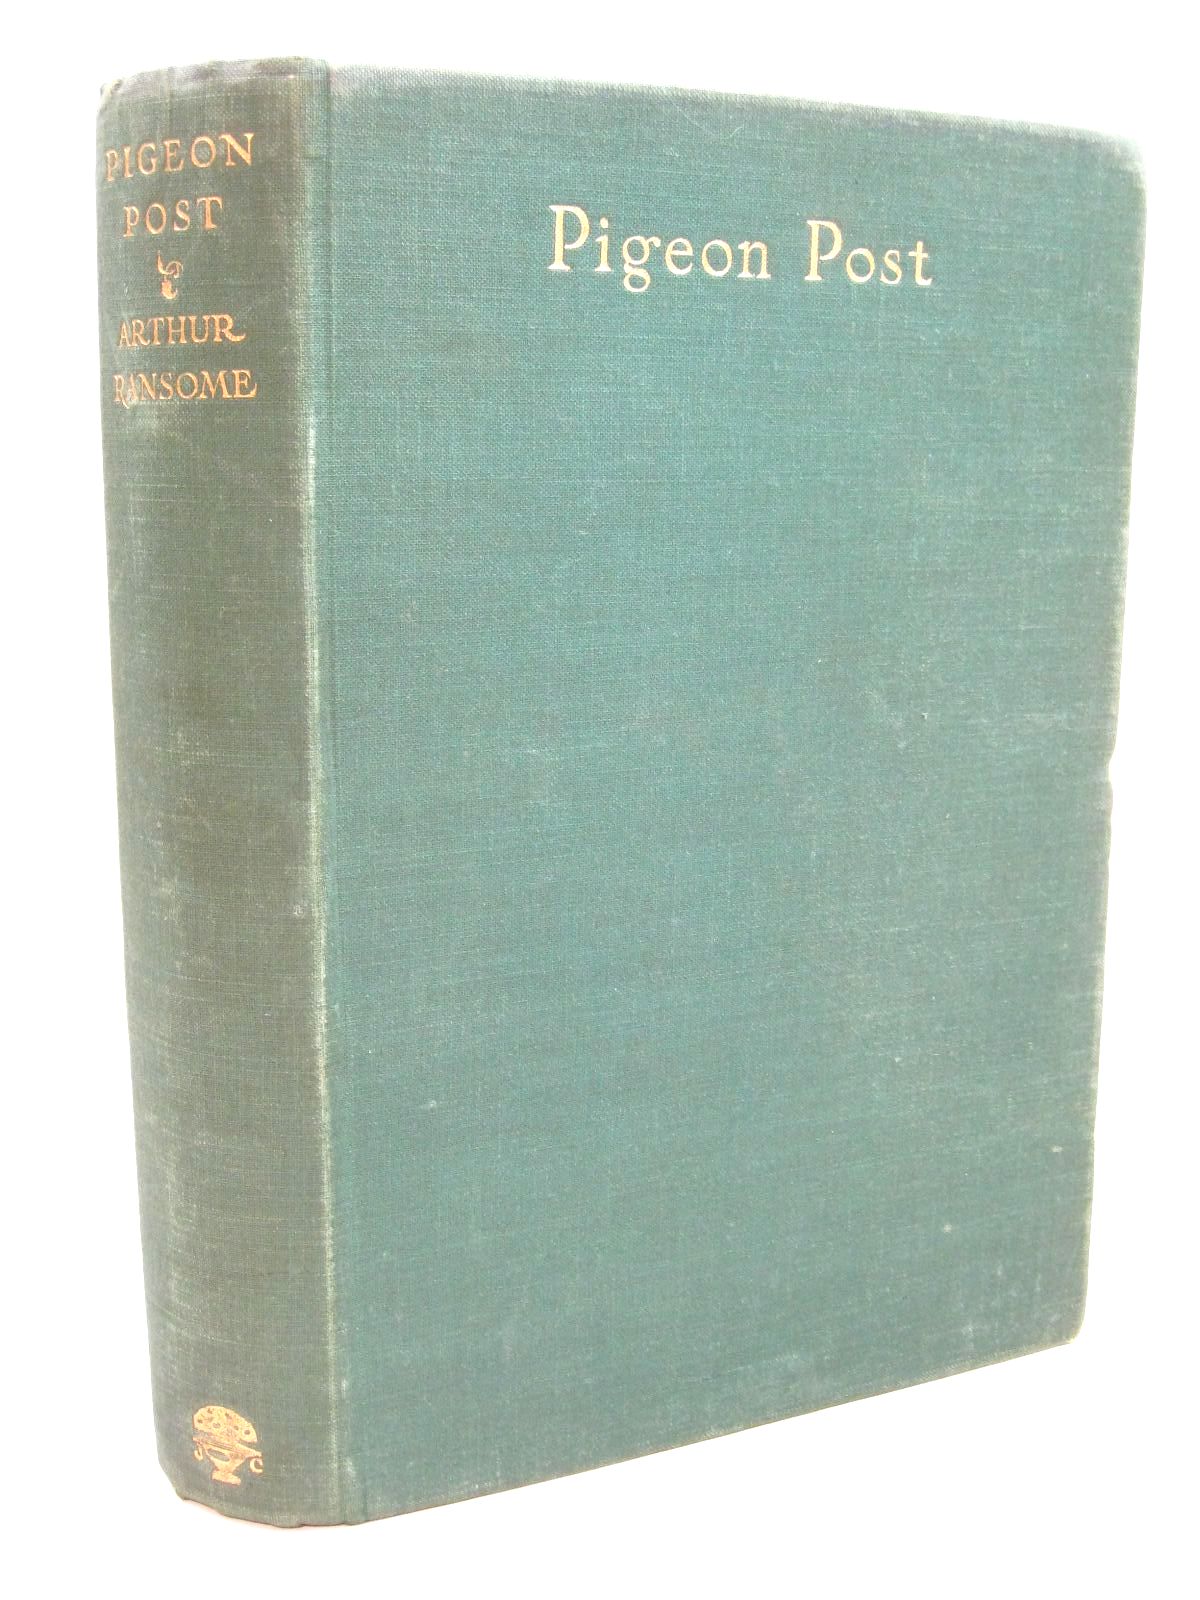 Photo of PIGEON POST written by Ransome, Arthur illustrated by Ransome, Arthur published by Jonathan Cape (STOCK CODE: 1316067)  for sale by Stella & Rose's Books